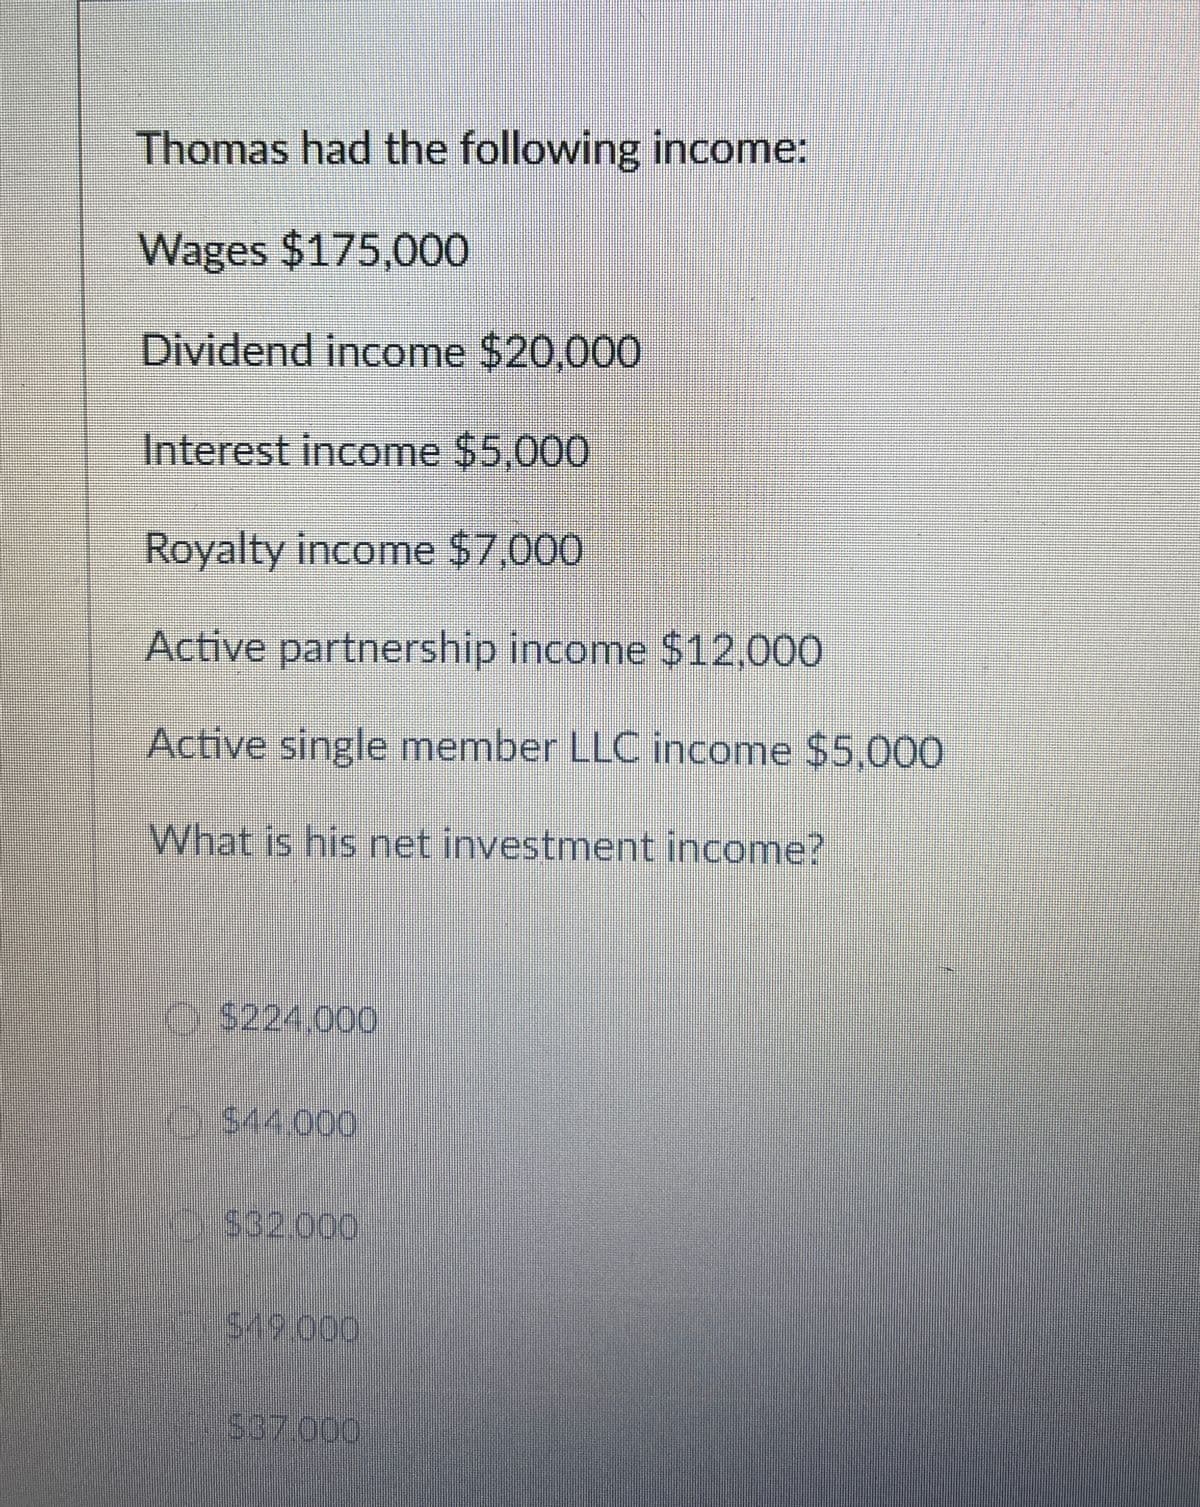 Thomas had the following income:
Wages $175,000
Dividend income $20,000
Interest income $5,000
Royalty income $7,000
Active partnership income $12,000
Active single member LLC income $5,000
What is his net investment income?
$224,000
$44.000
$32.000
$19.000
$37.000